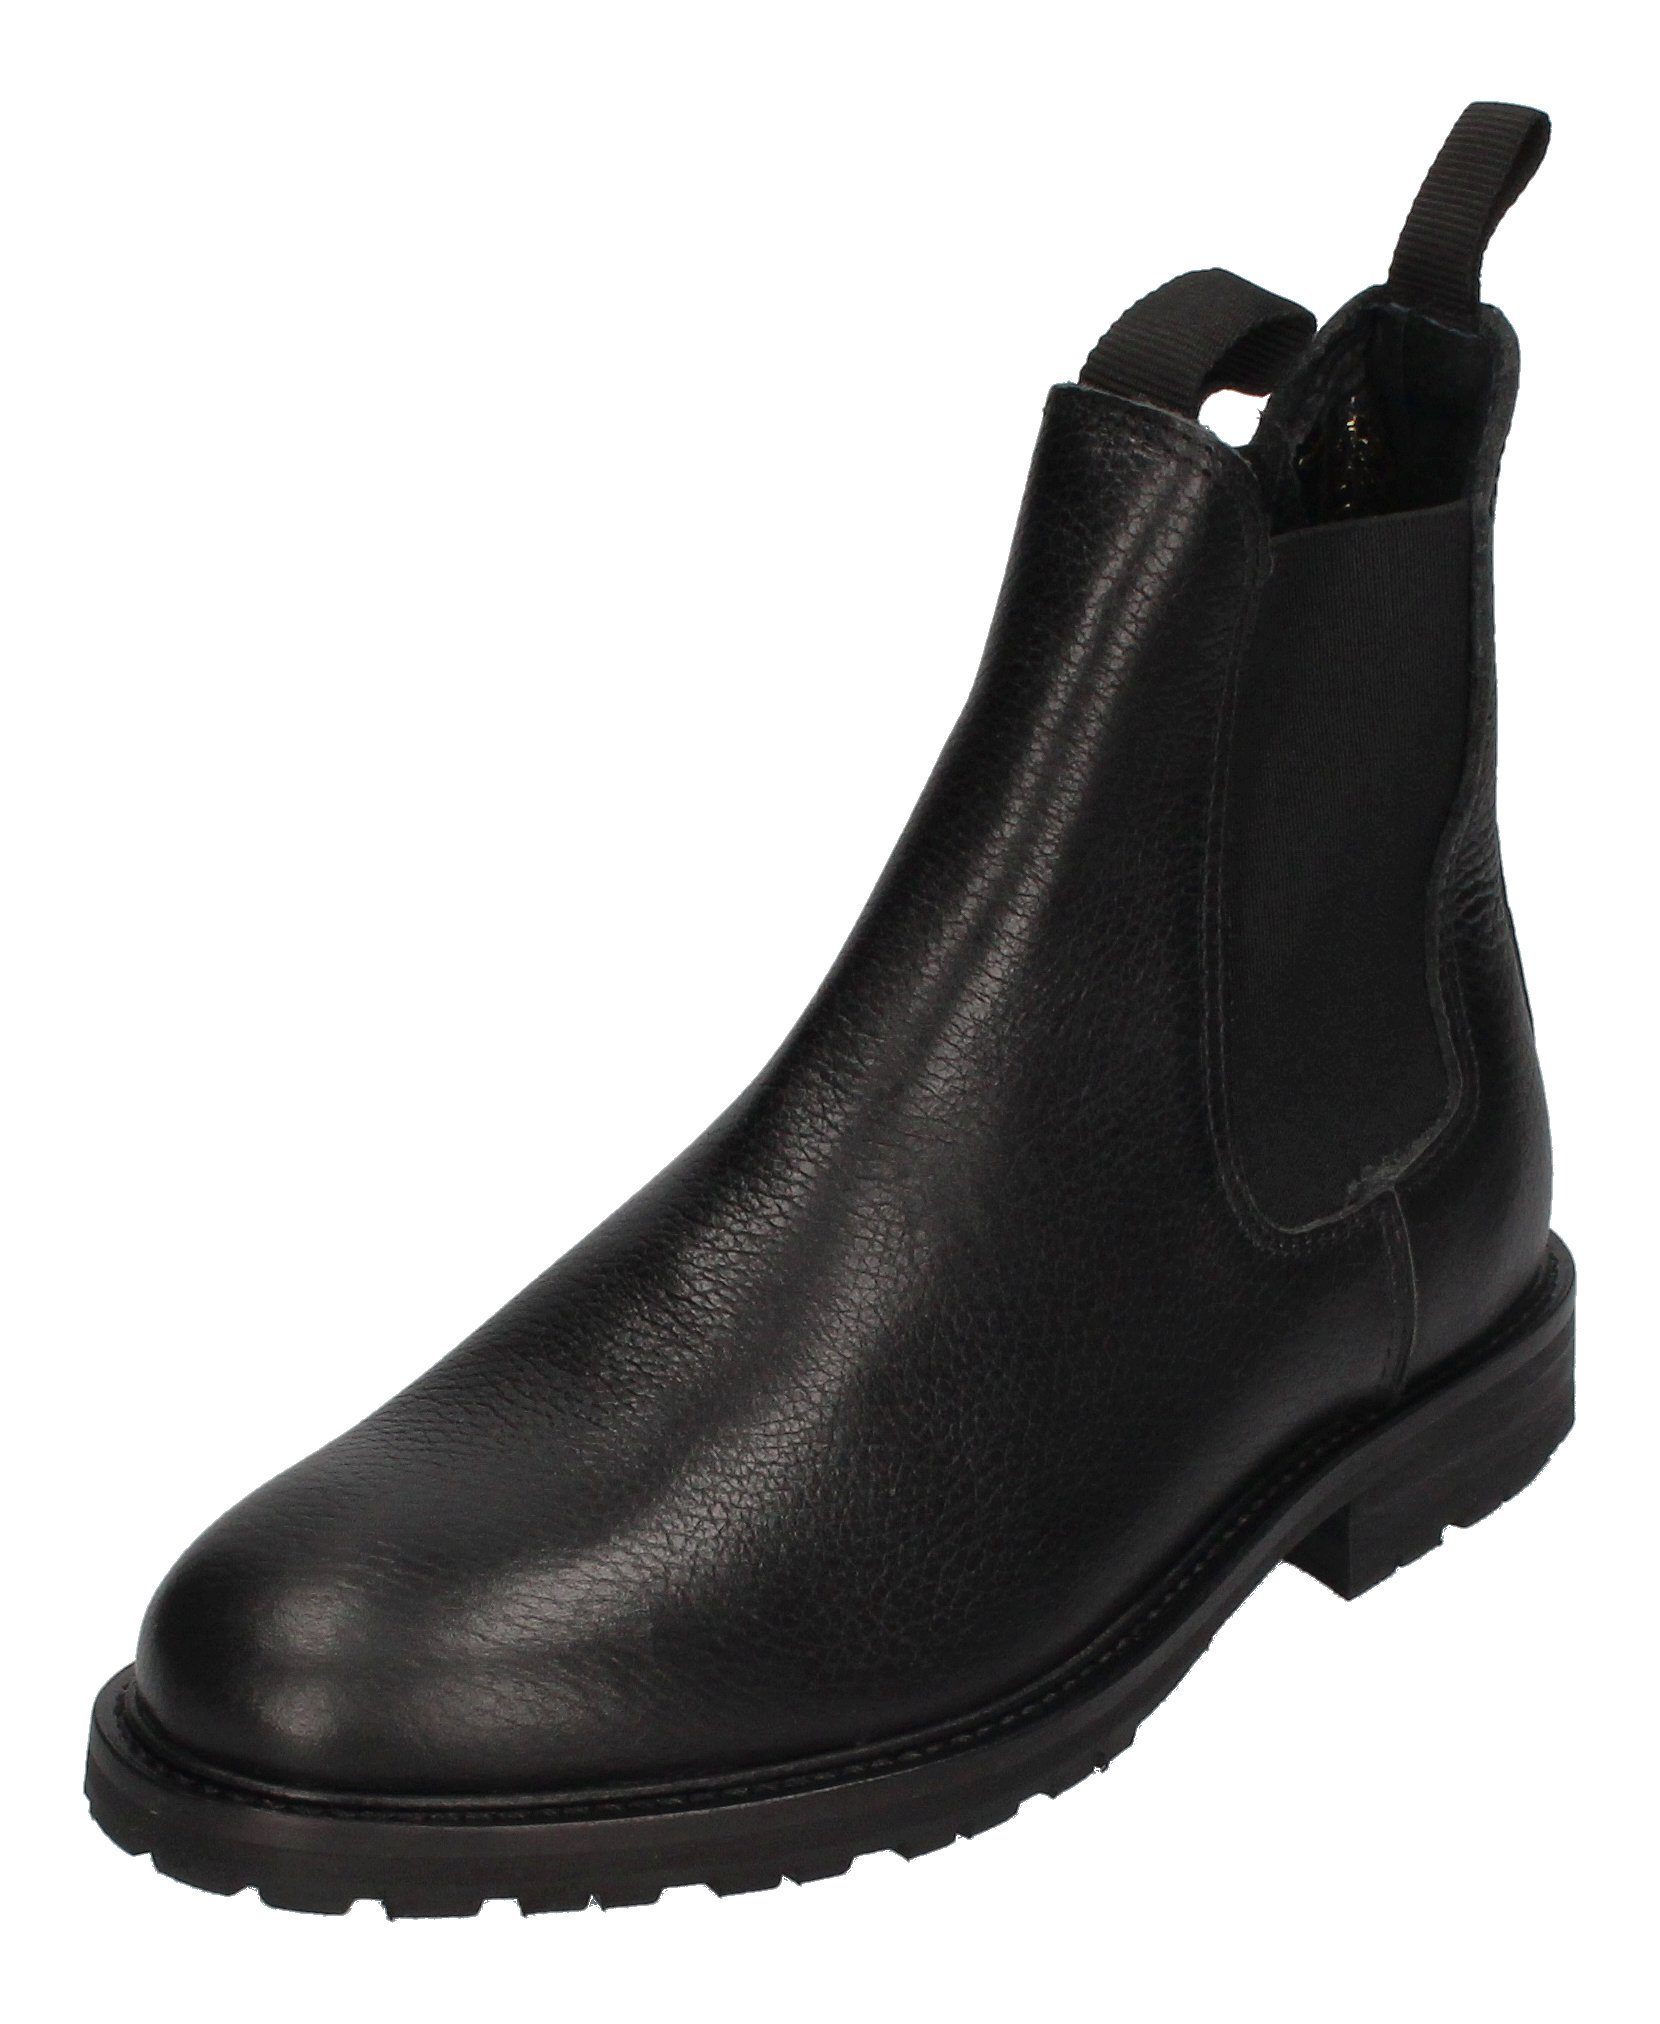 L STB2028 THE Chelseaboots AVERY Black BEAR SHOE